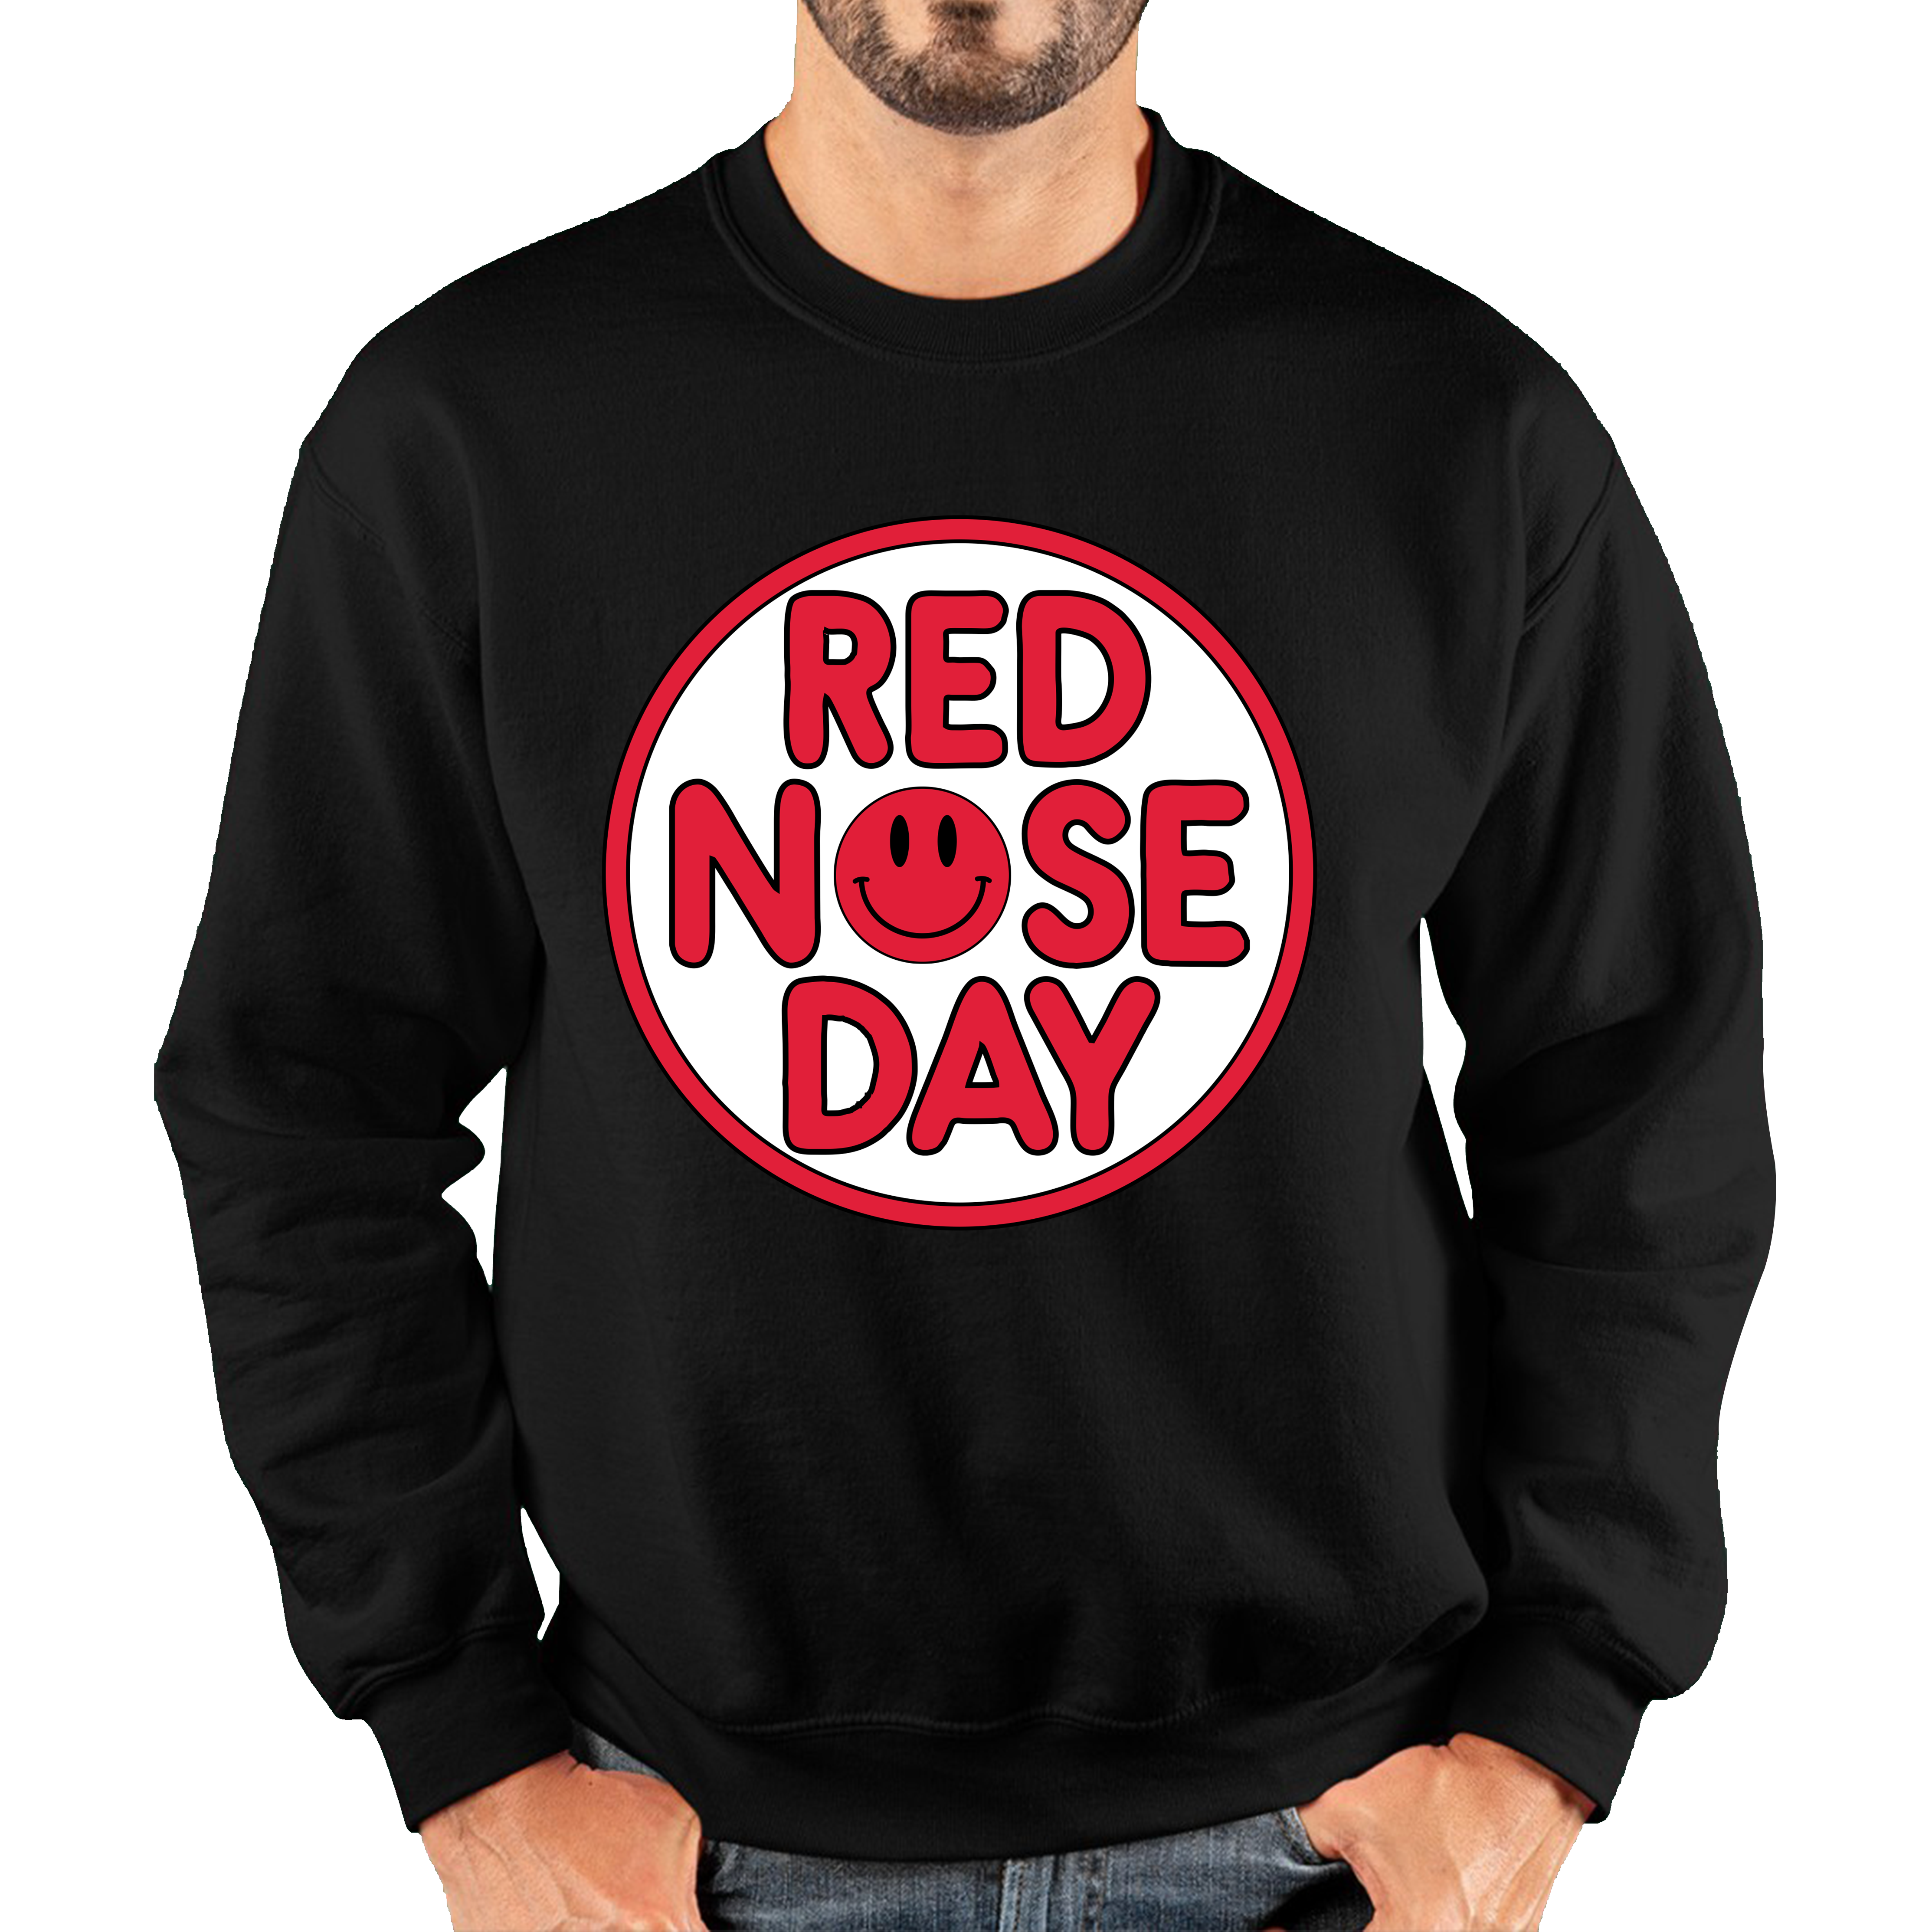 Smiley Face Red Nose Day Adult Sweatshirt. 50% Goes To Charity